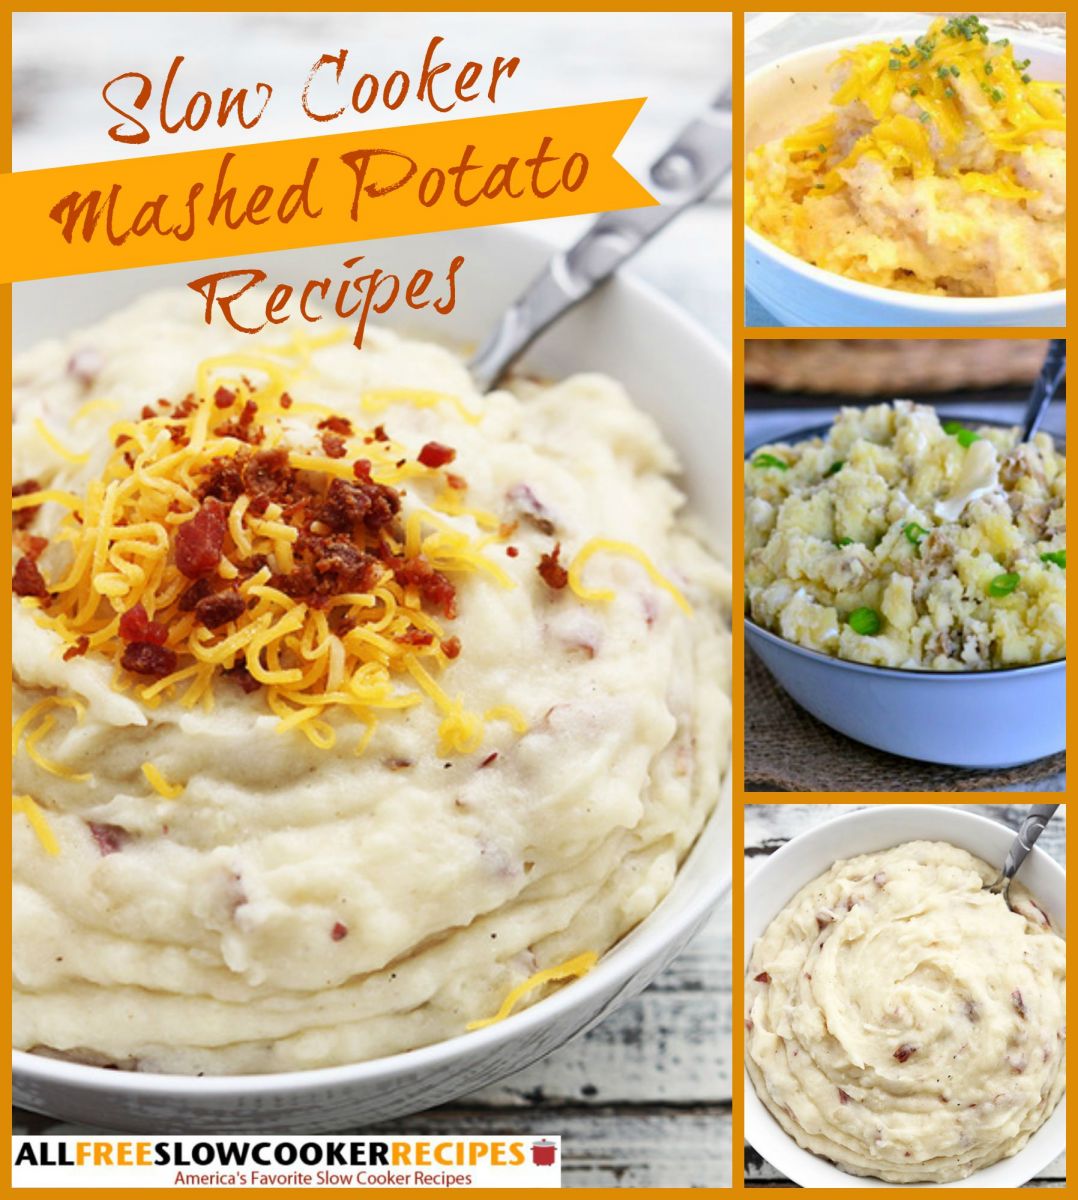 Slow Cooker Mashed Potatoes Recipes